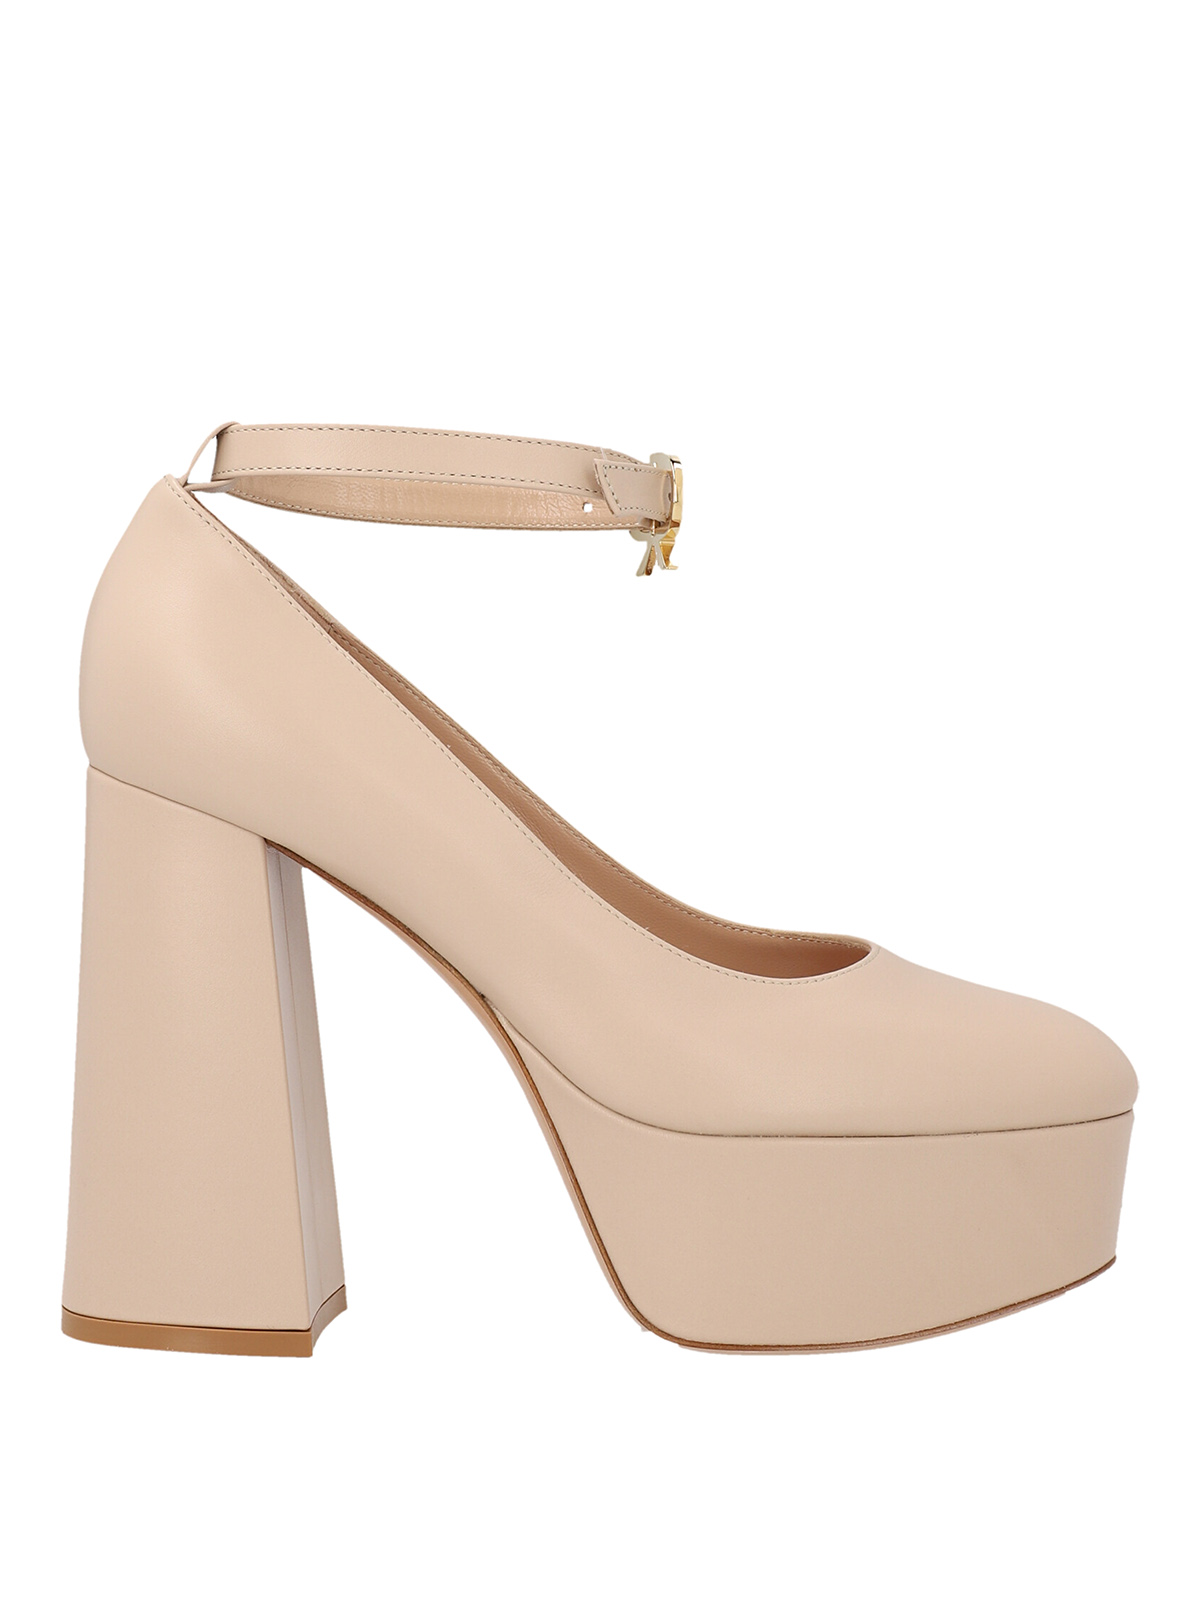 Gianvito Rossi Mary Jane Pumps In Beis